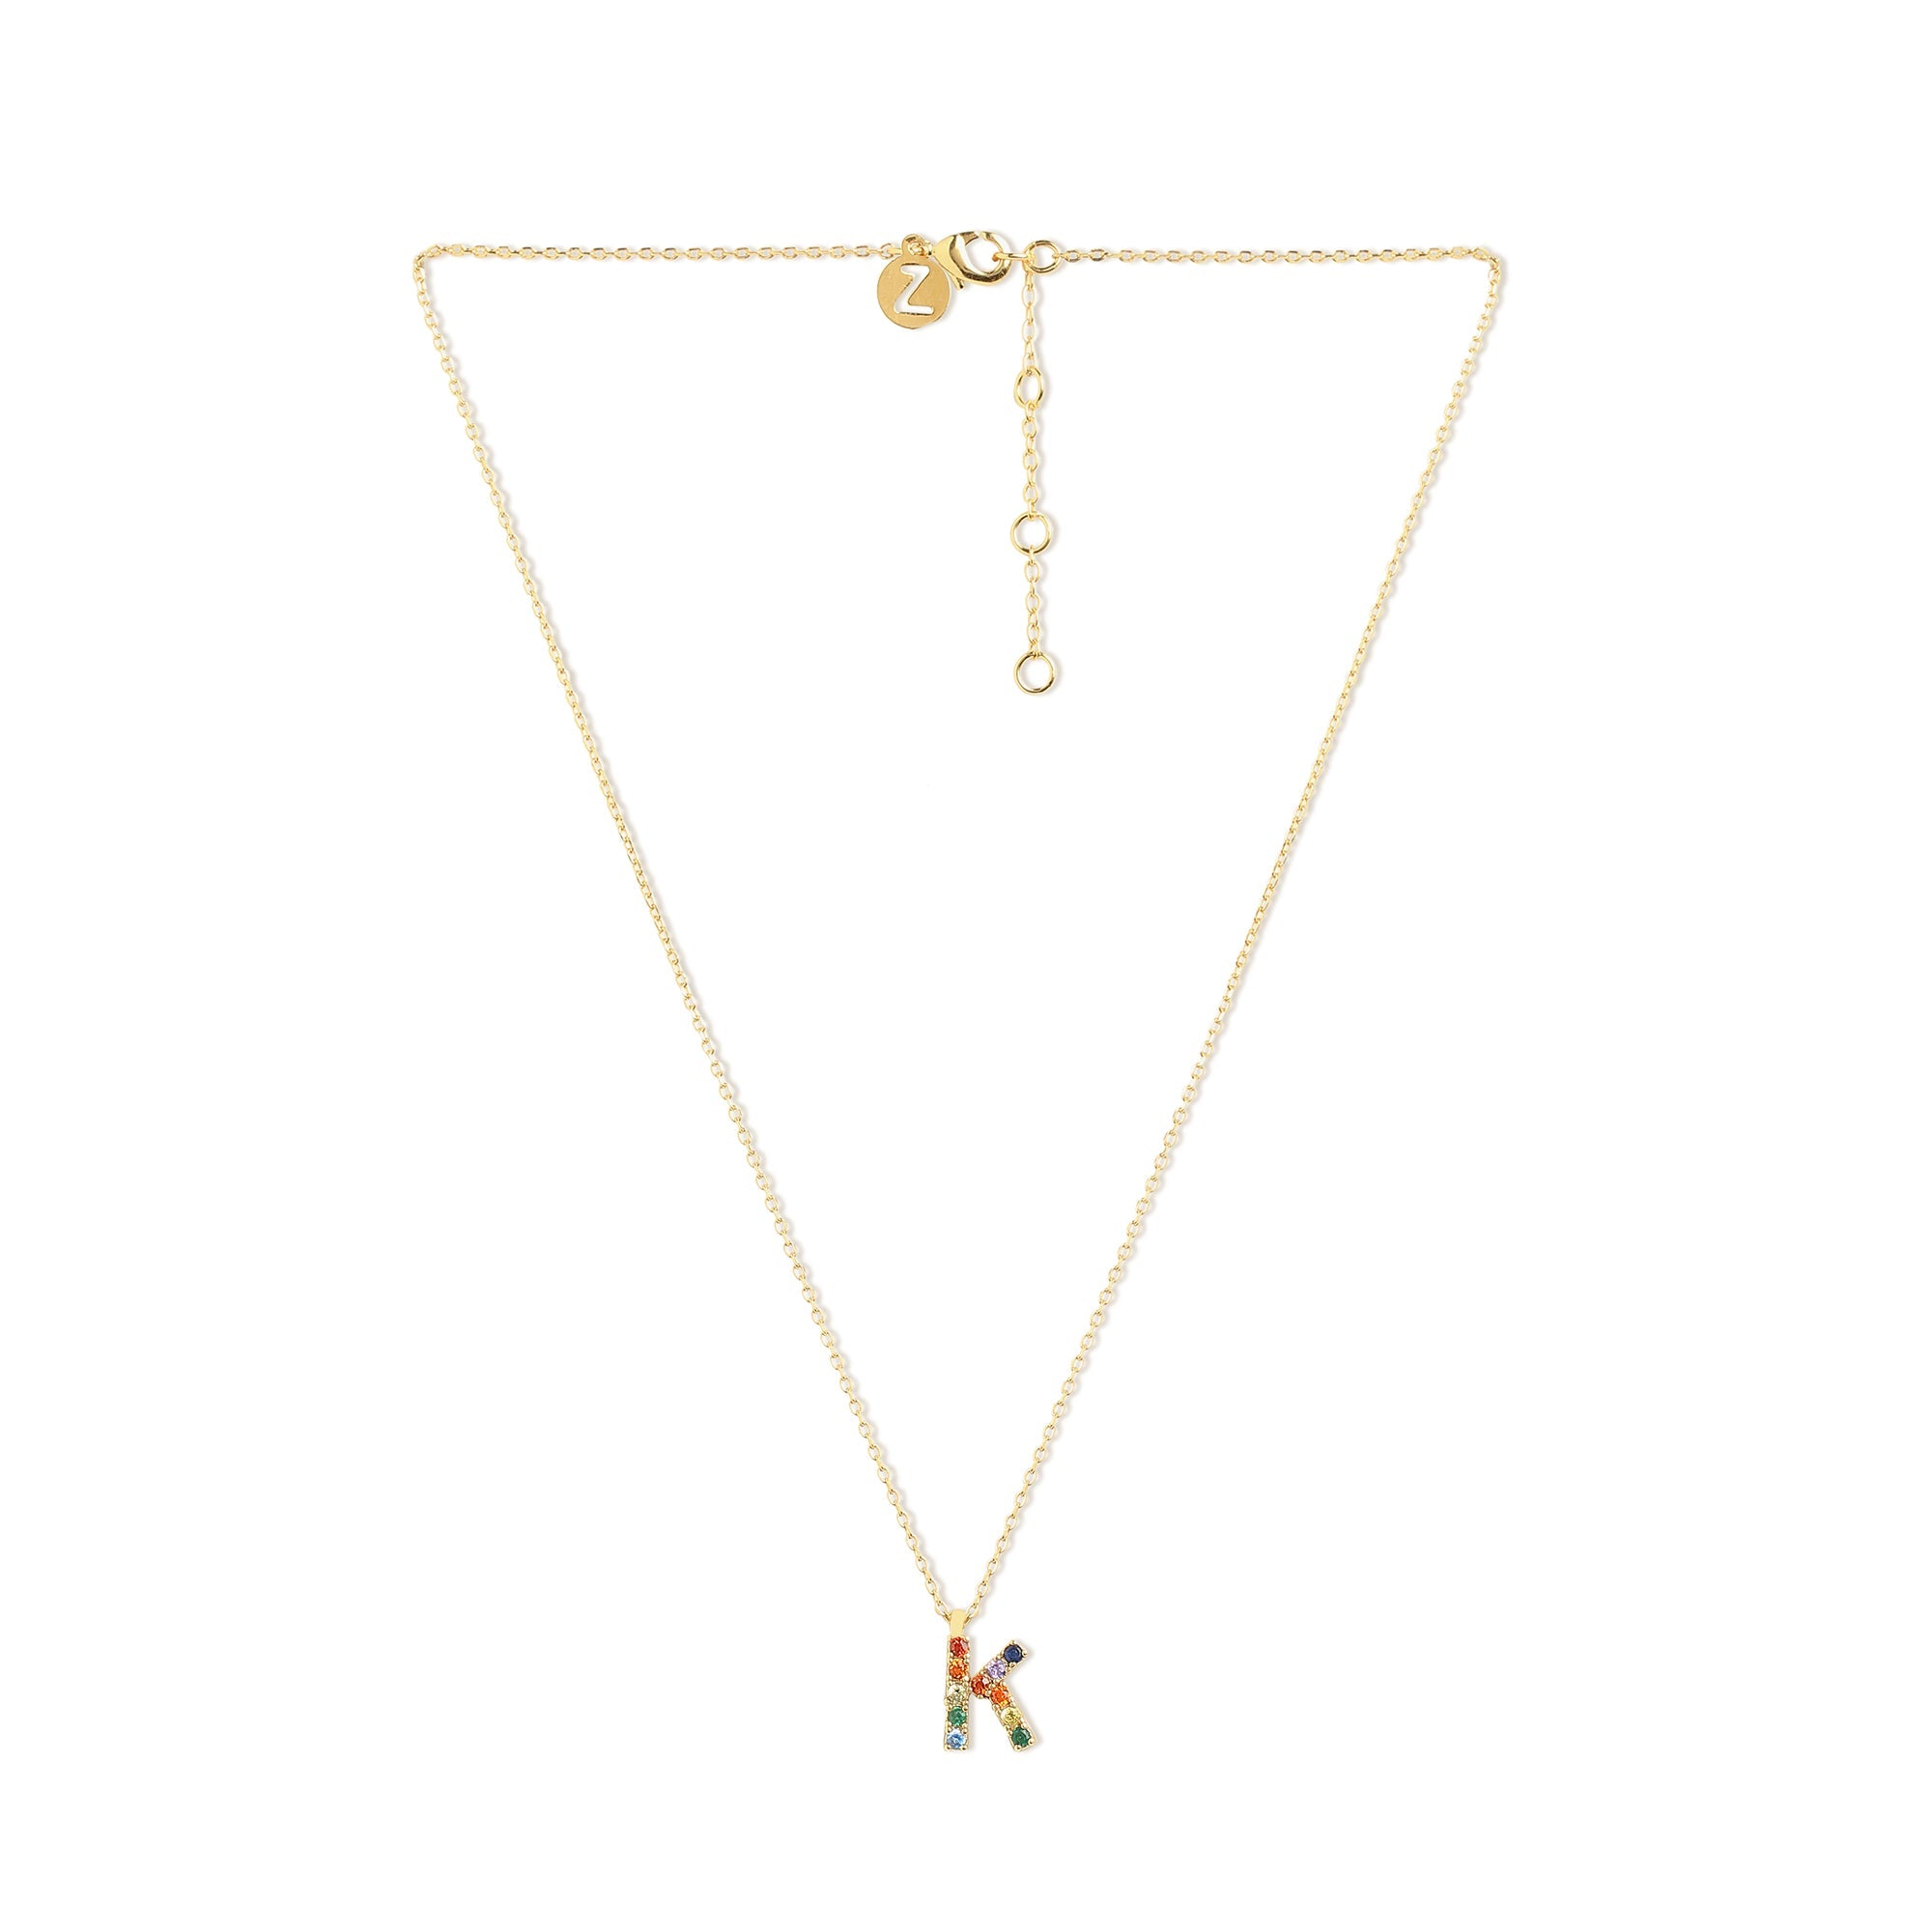 Real Gold Plated "K" Rainbow Initial Pendant For Women By Accessorize London